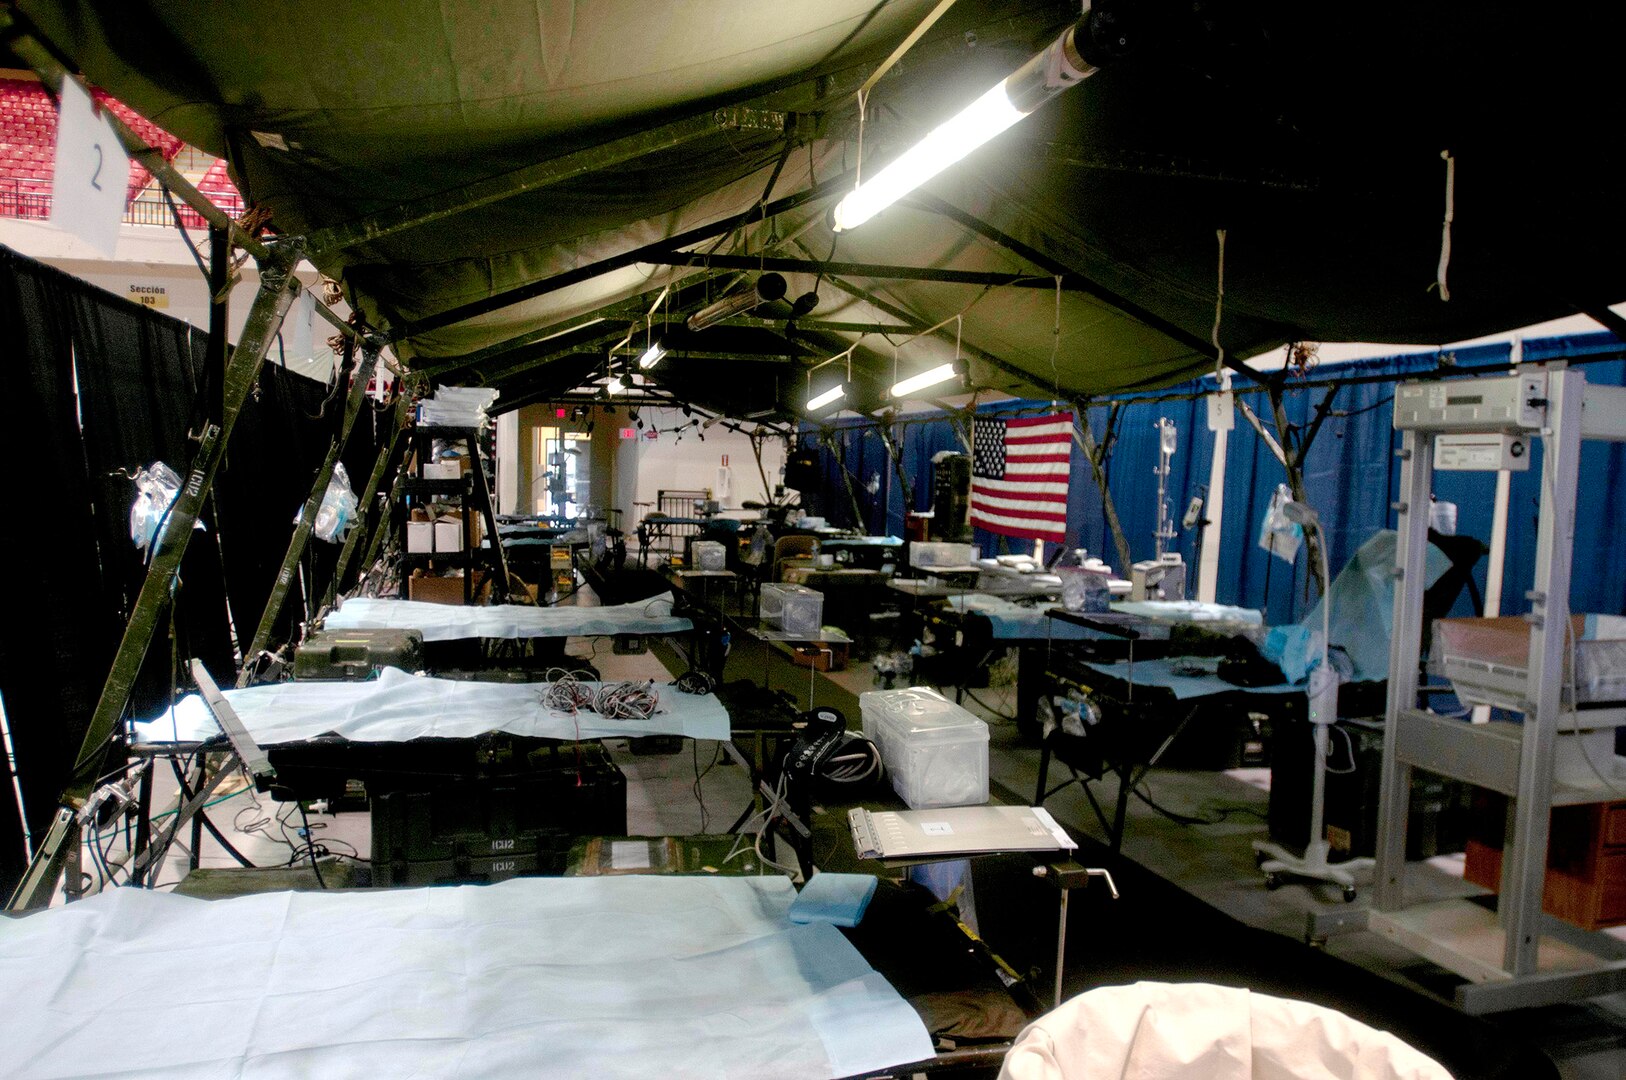 A 12-bed intensive care unit is set up for patients as part 14th Combat Support Hospital, 44th Medical Brigade's field hospital at Humacao Arena in Humacao, Puerto Rico Oct. 16, 2017. The 14th CSH's mission is to provide lifesaving support and patient care to citizens in the southeast region of the island.